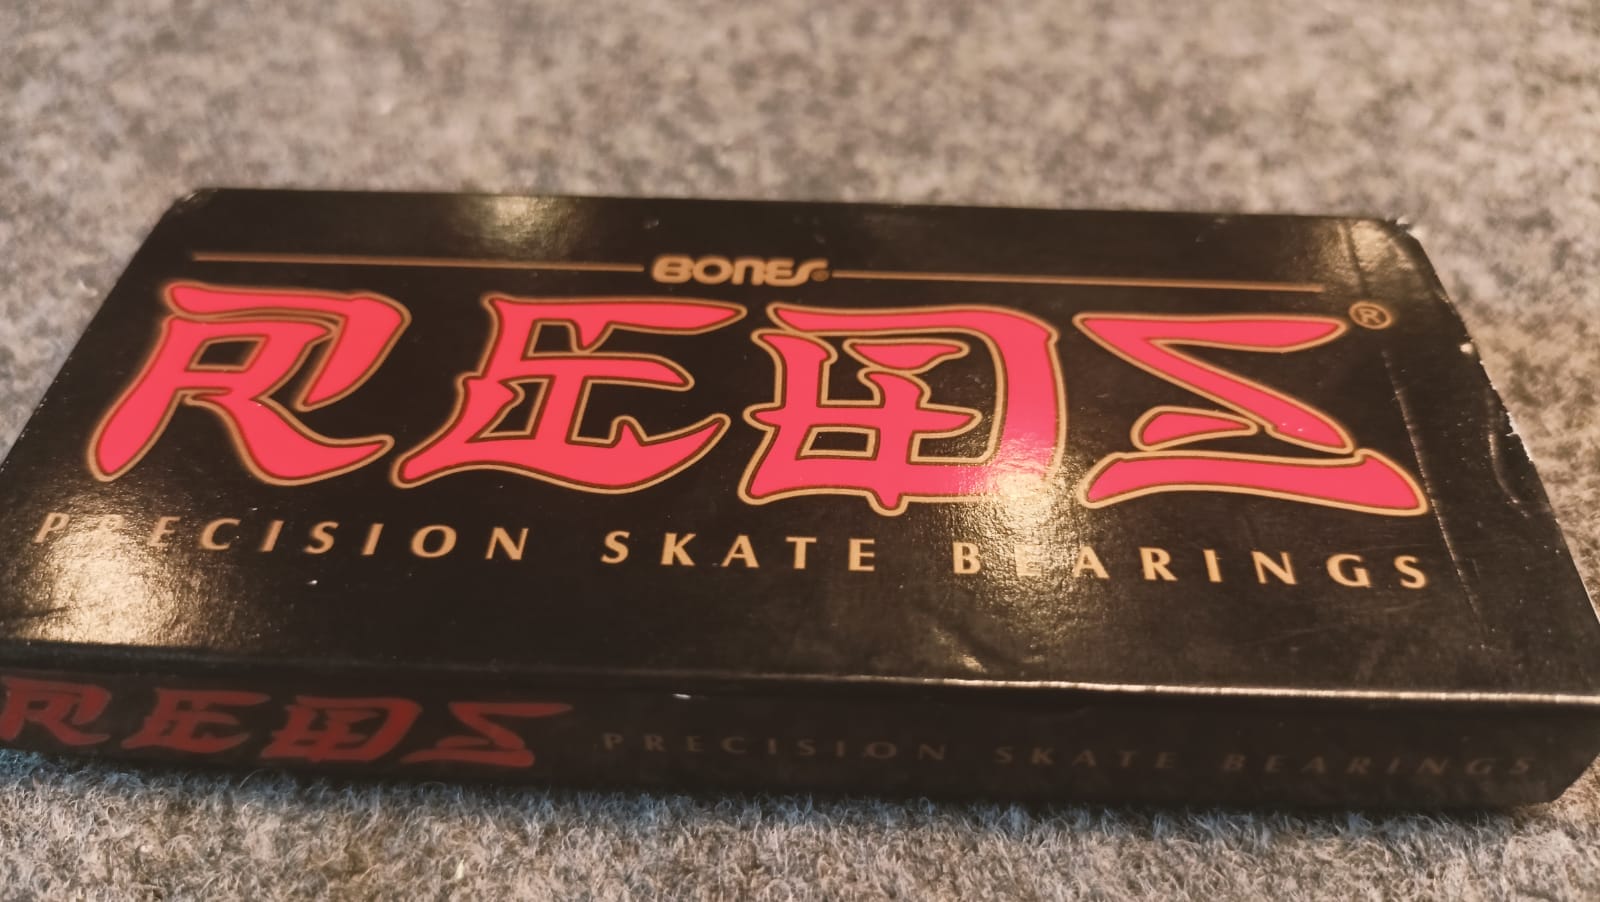 Can I mix and match different brands of bearings on my skateboard?